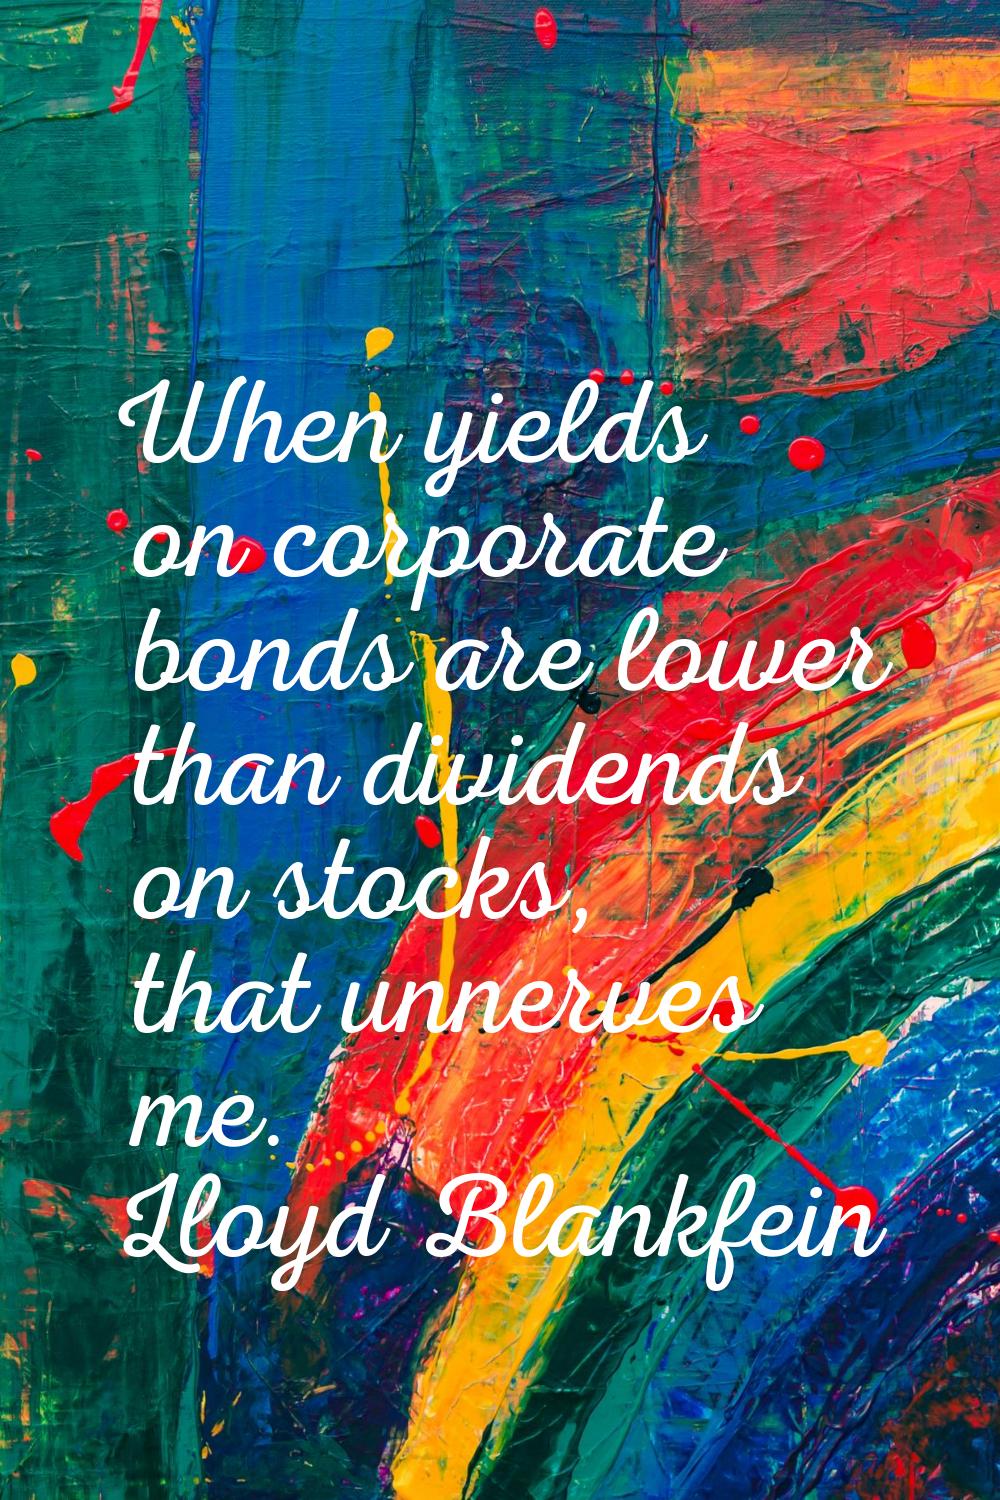 When yields on corporate bonds are lower than dividends on stocks, that unnerves me.